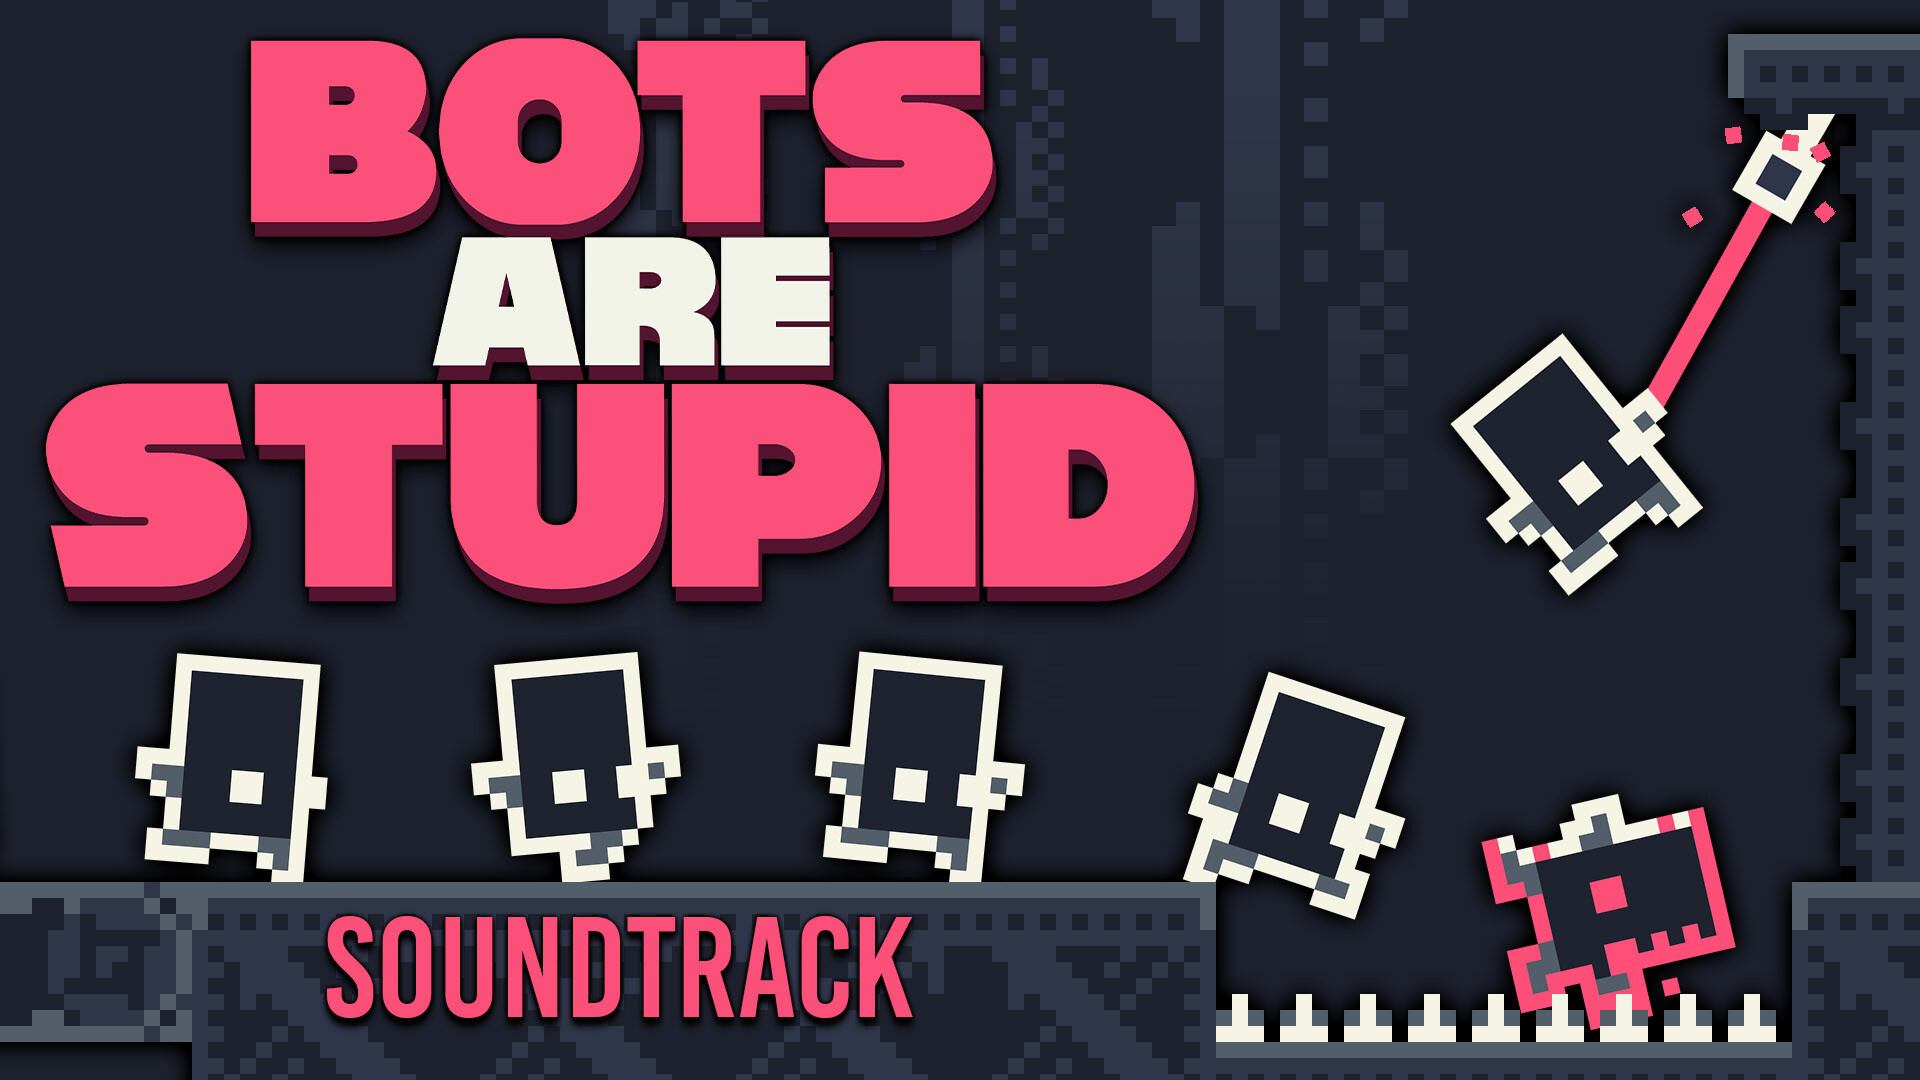 Bots Are Stupid Soundtrack Featured Screenshot #1